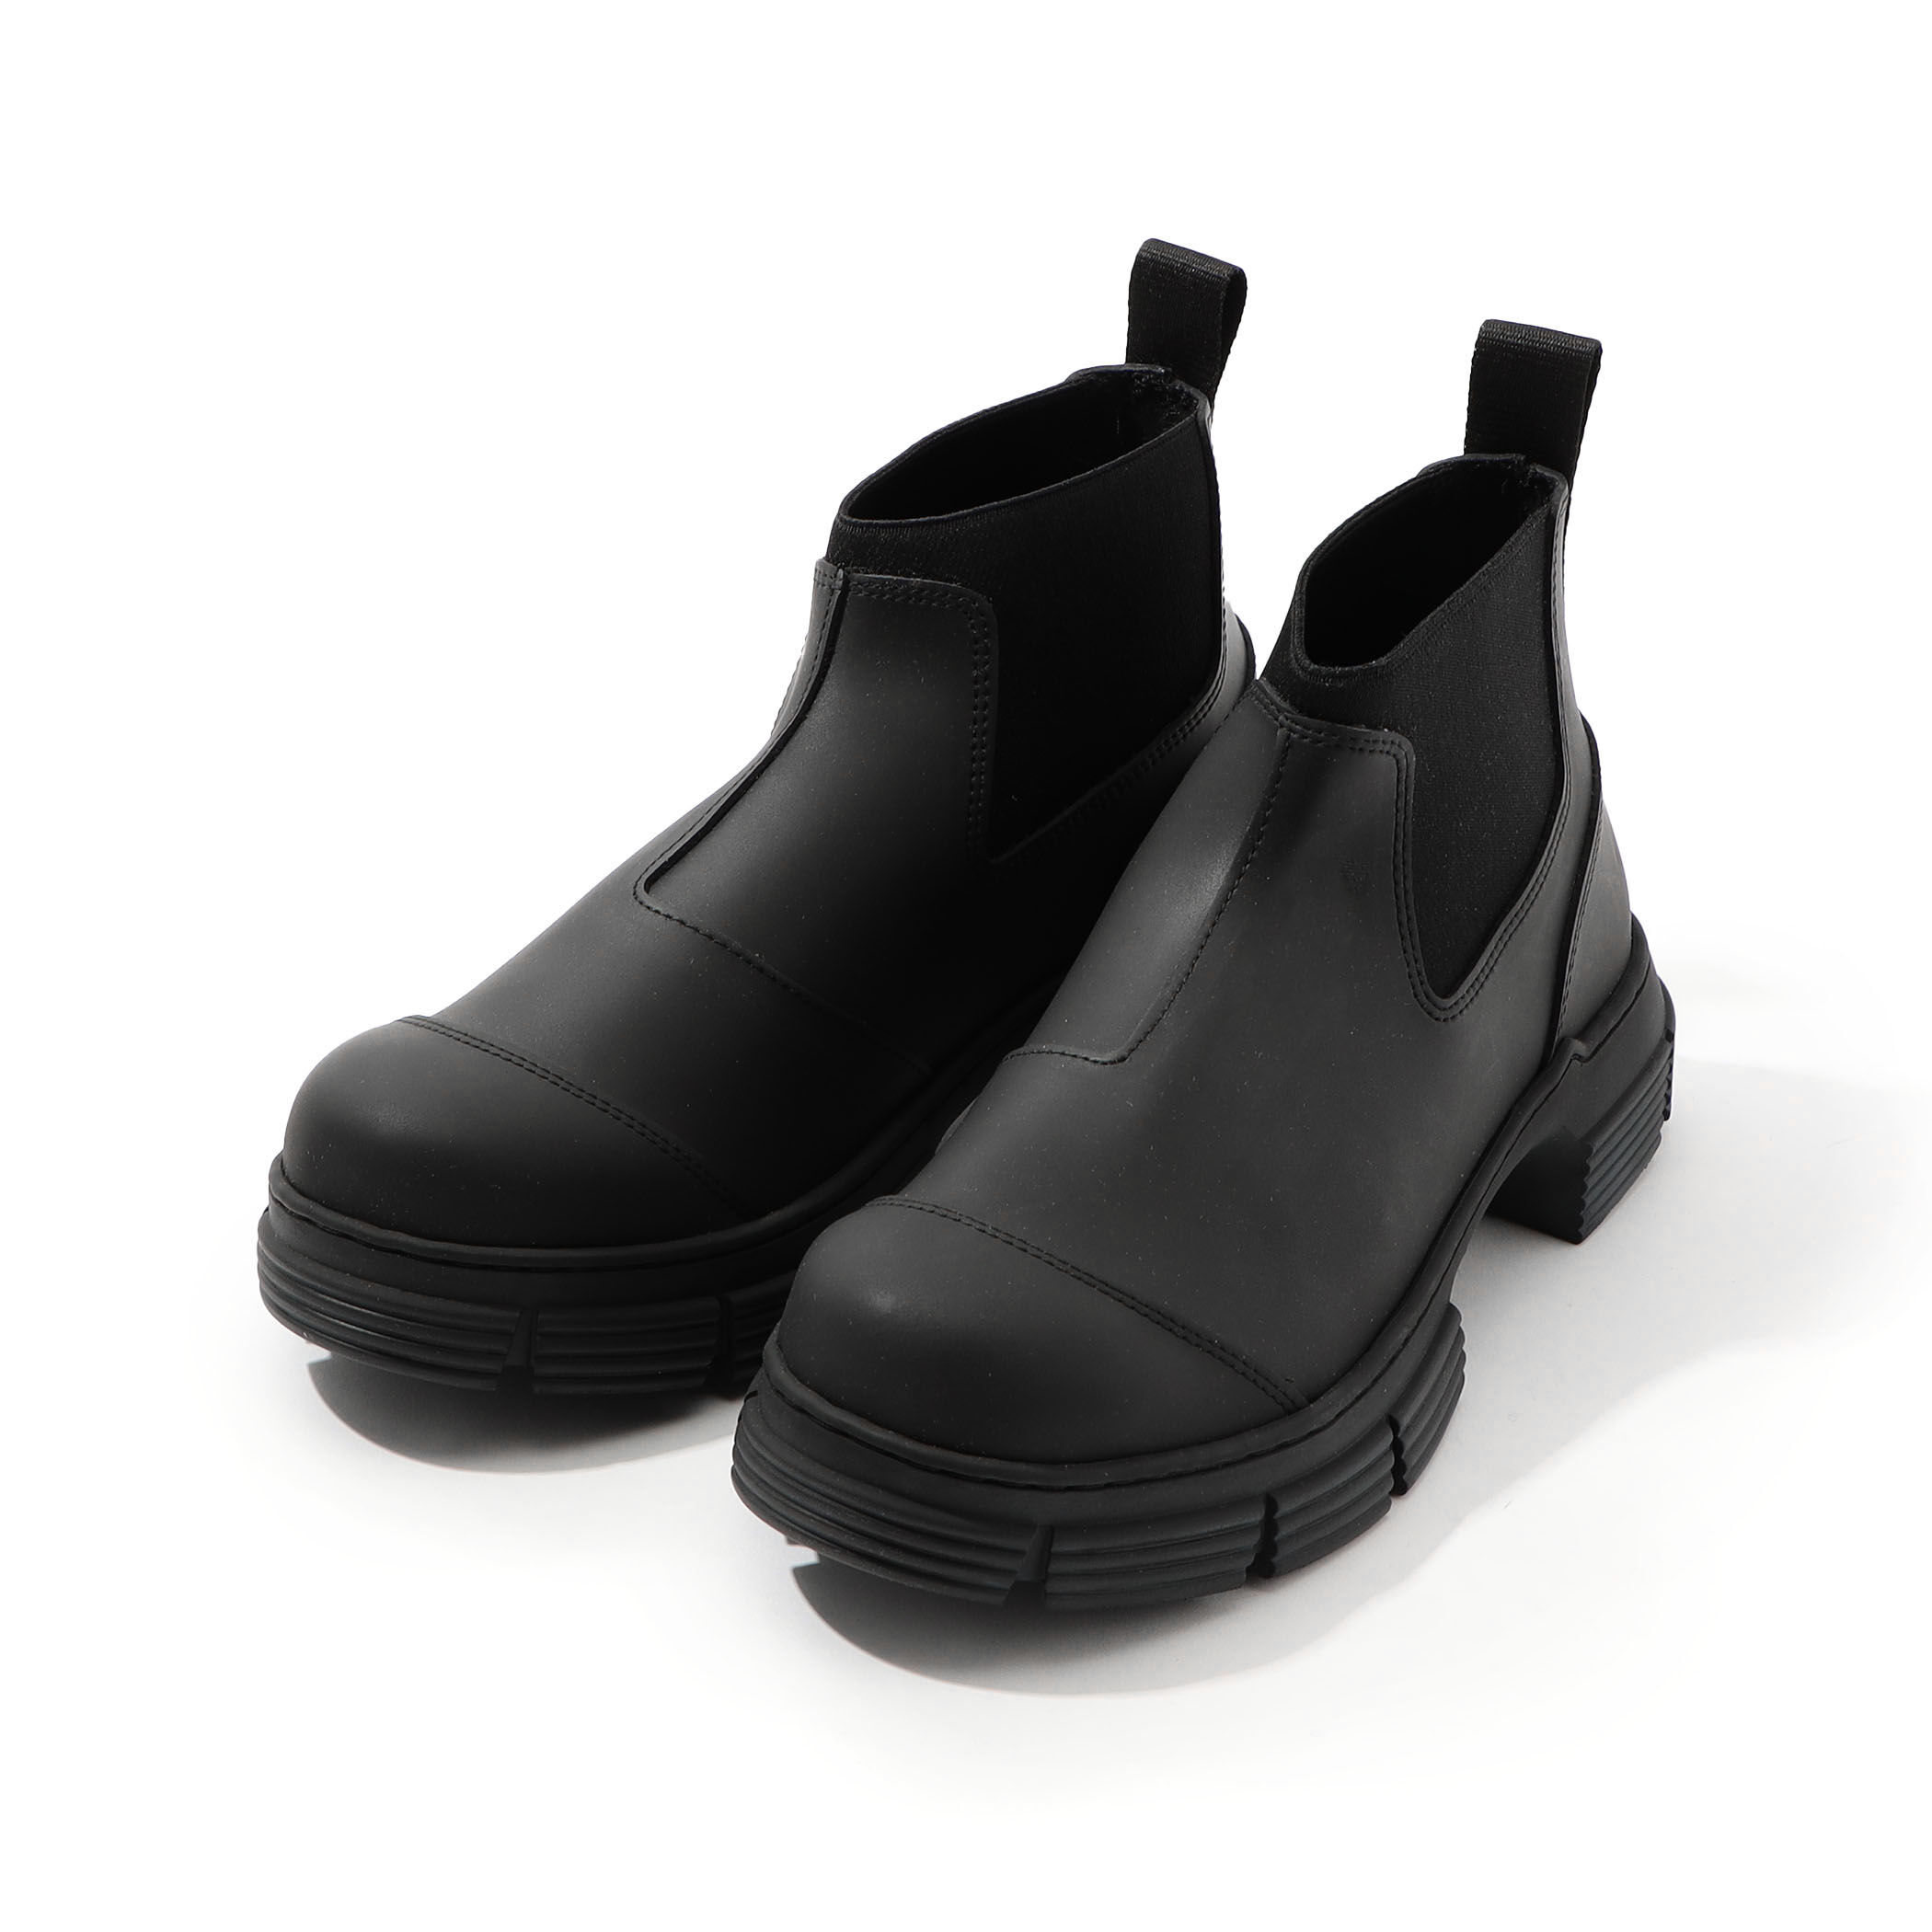 GANNI♡Recycled Rubber Boots筒丈約15センチ